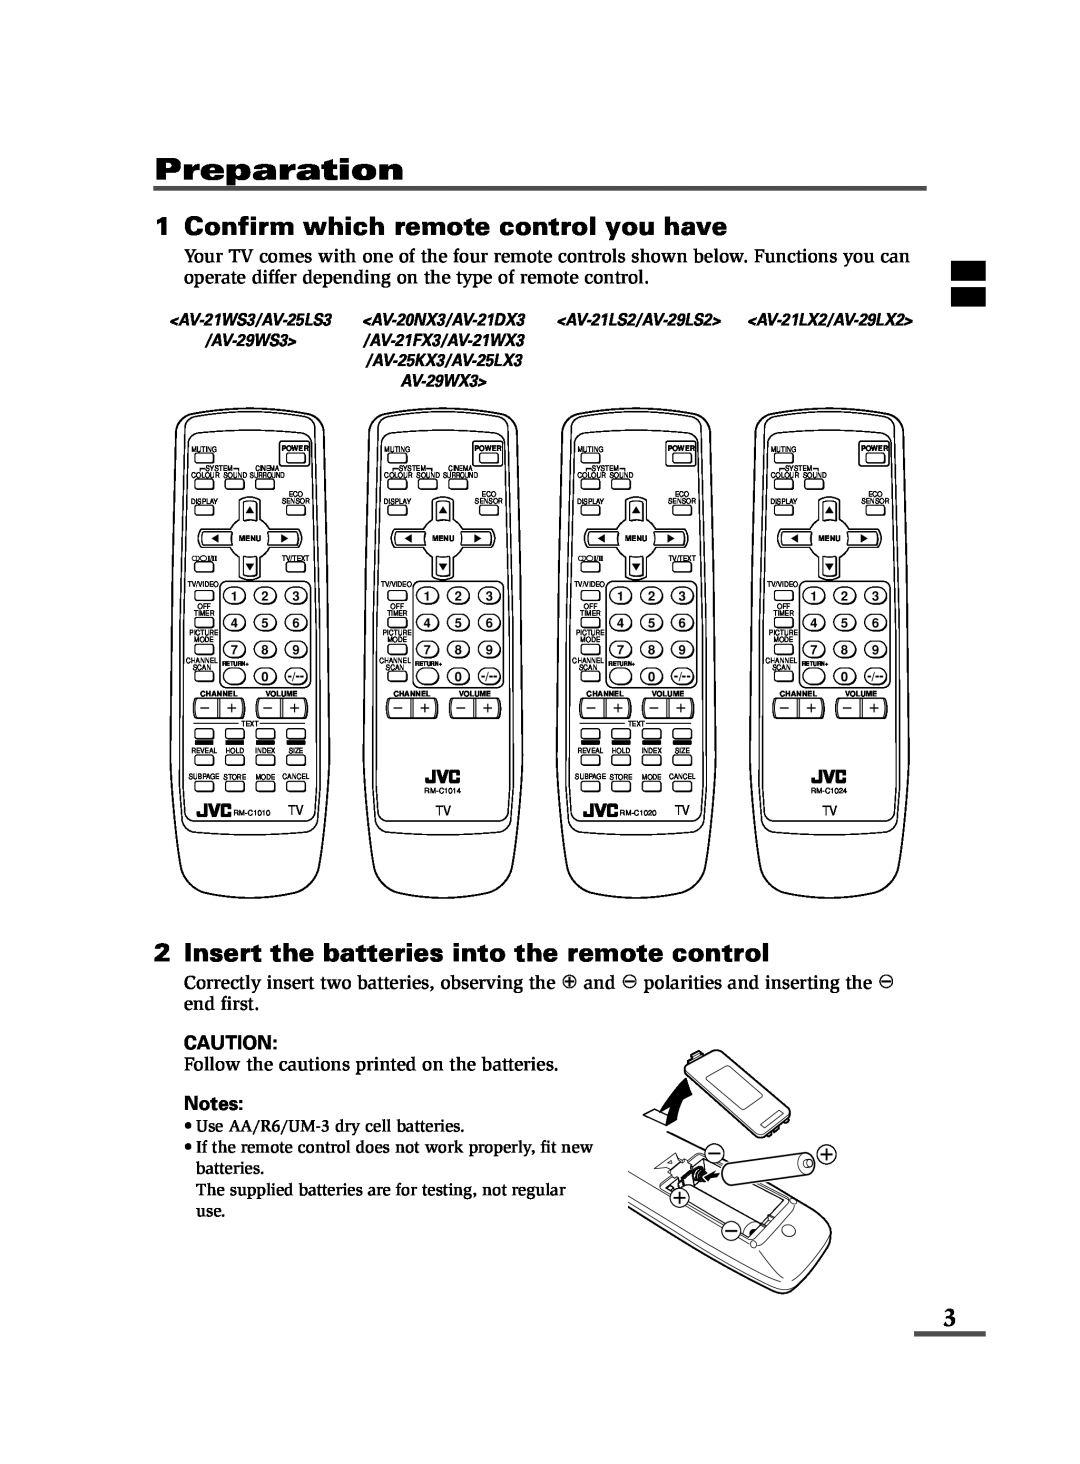 JVC specifications Preparation, Confirm which remote control you have, Insert the batteries into the remote control 